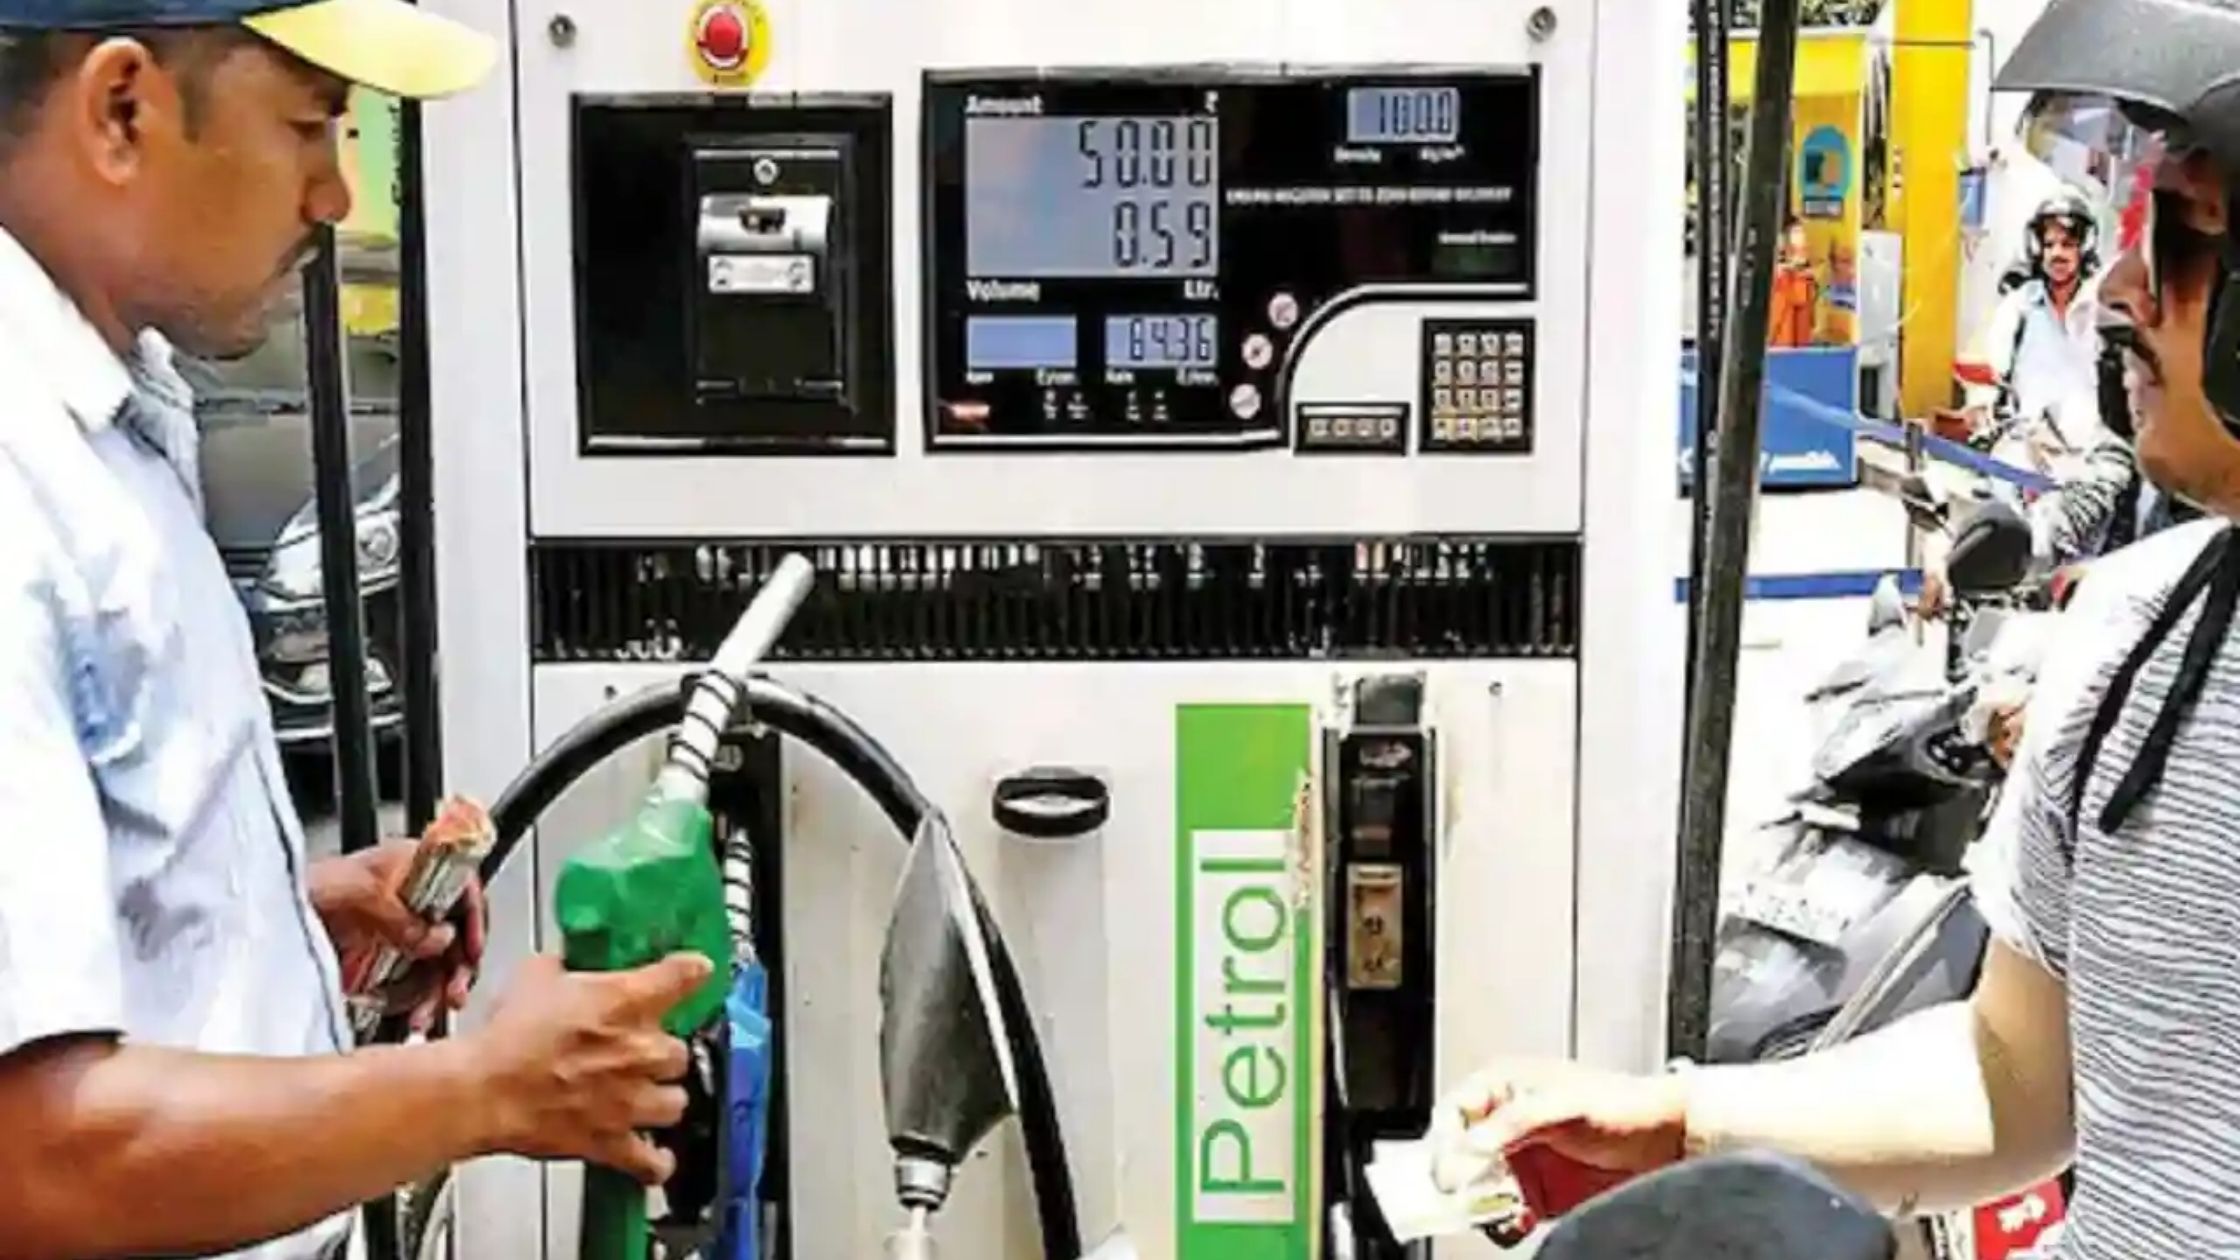 Petrol diesel prices increased for the second consecutive day